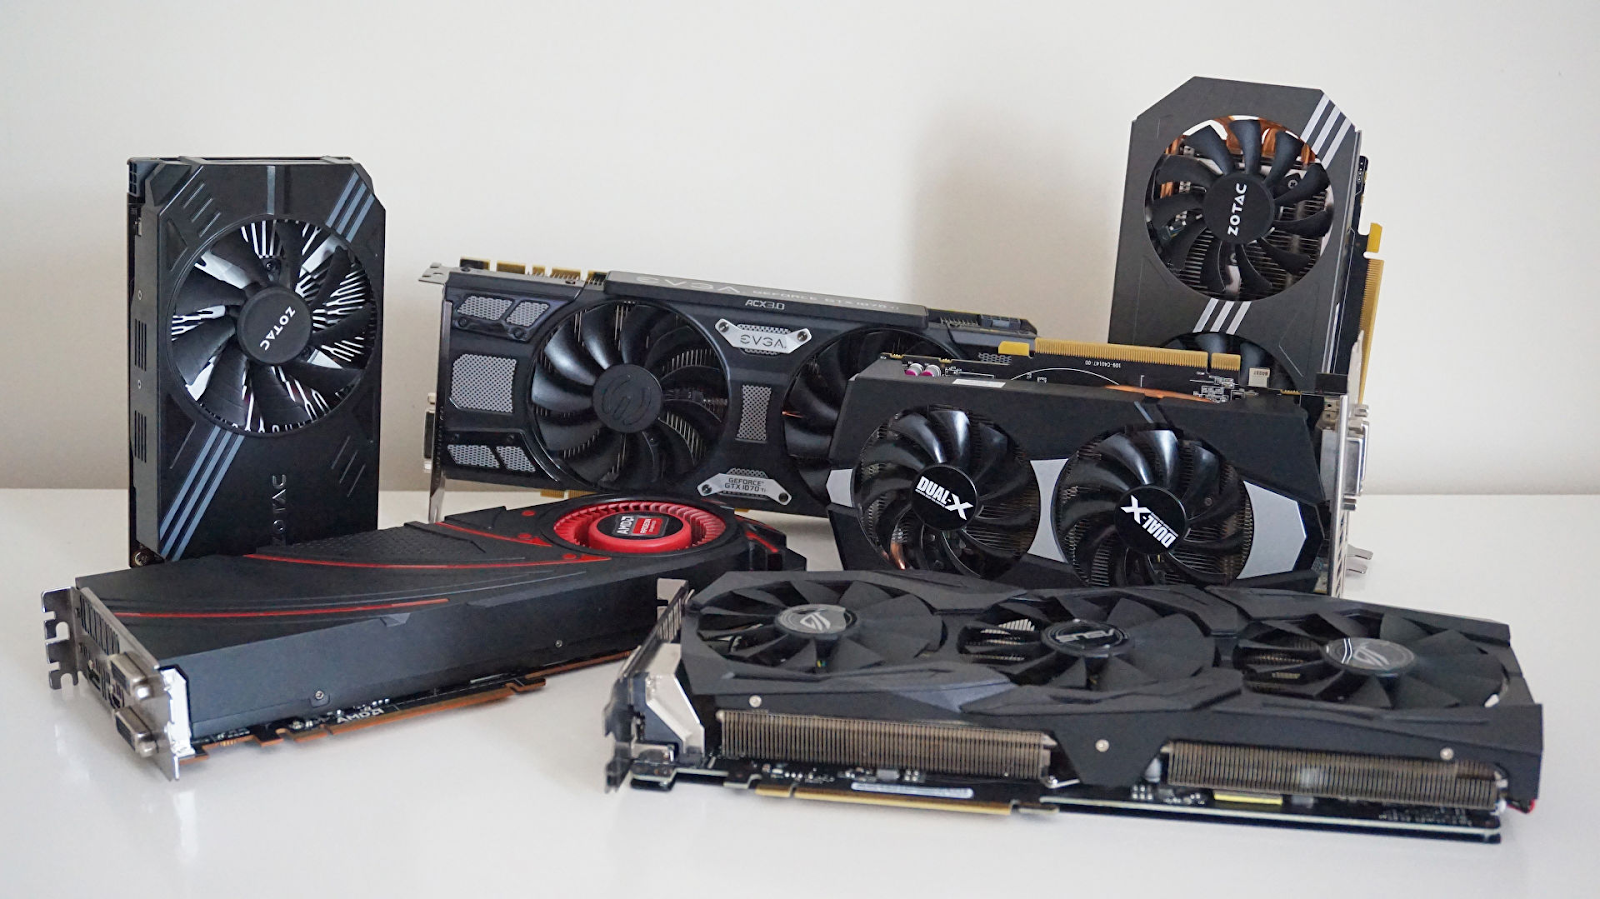 Different GPUs which helps when mining crypto.